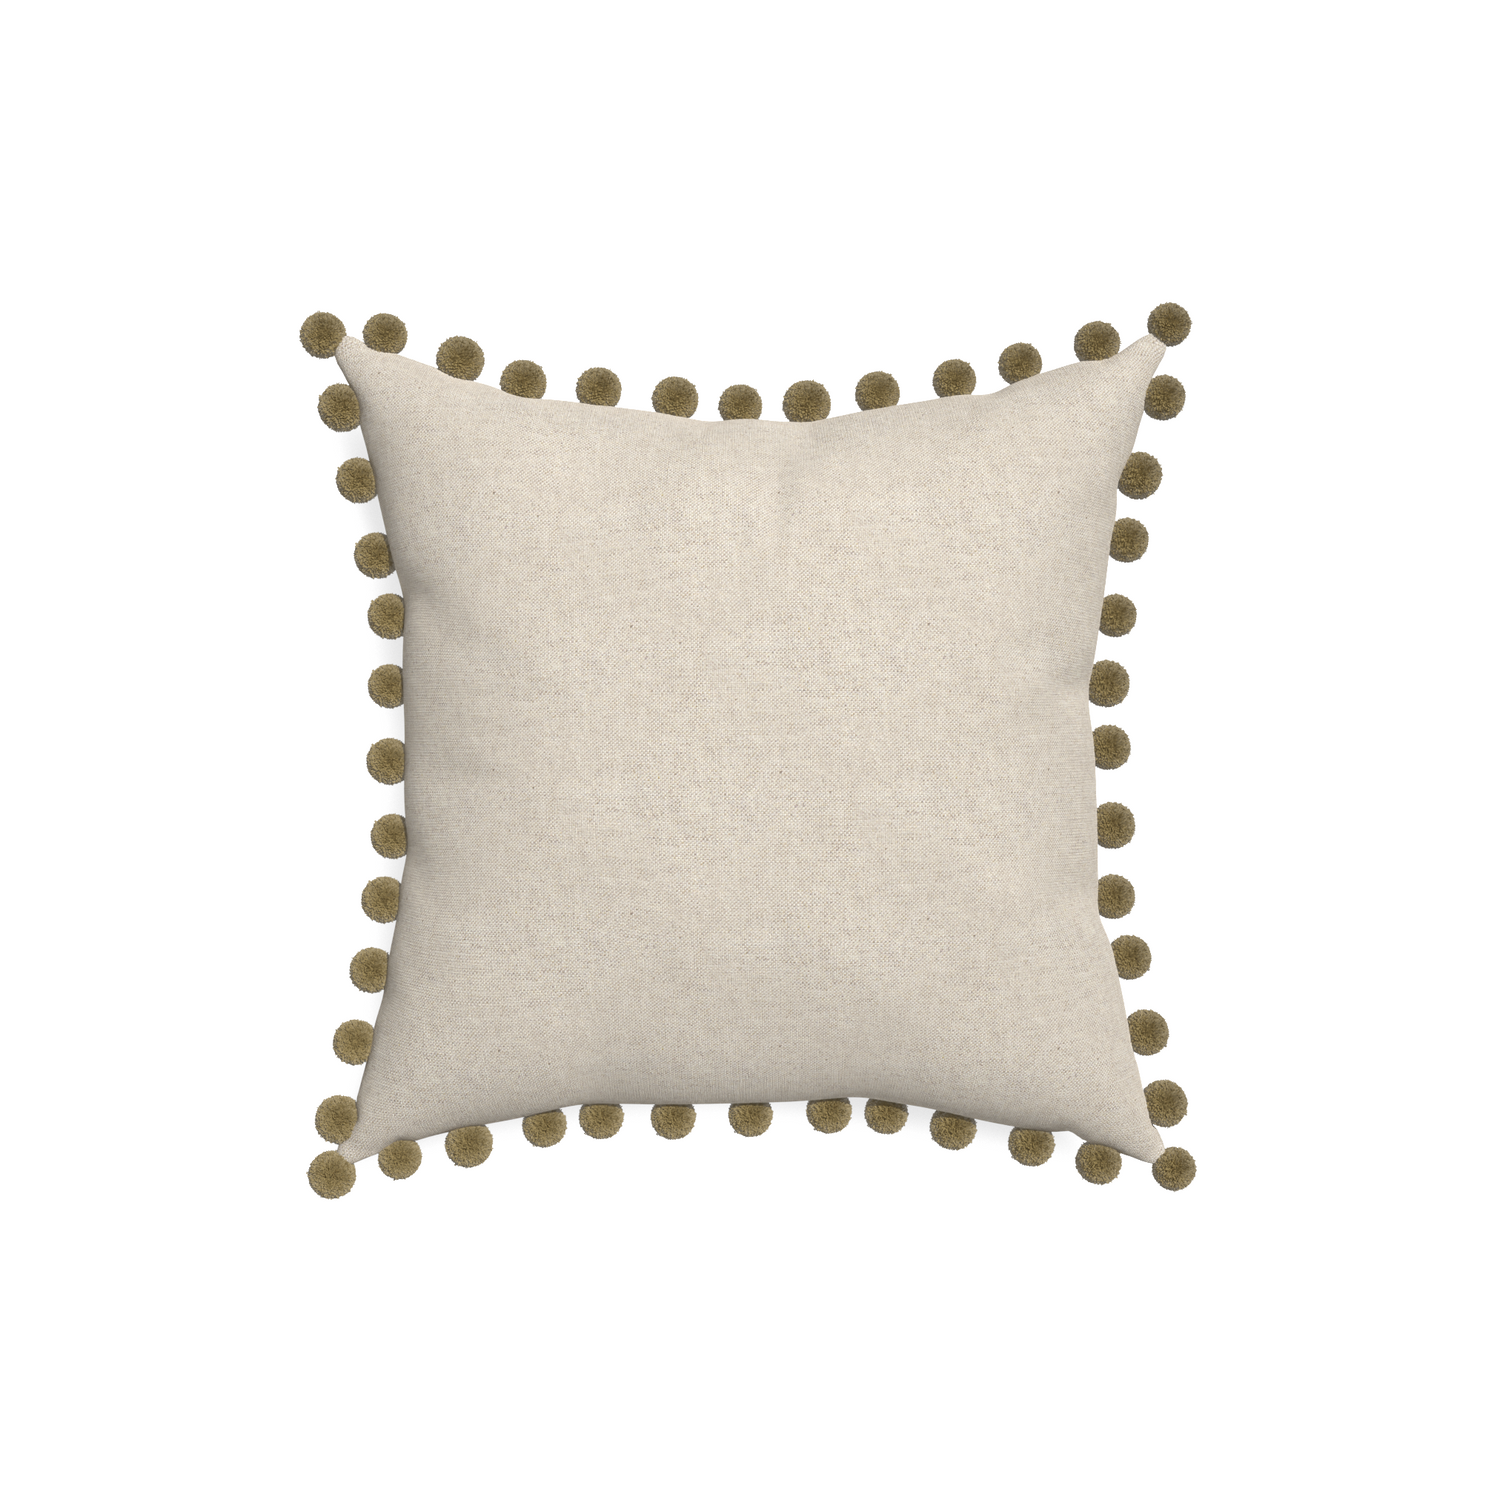 18-square oat custom light brownpillow with olive pom pom on white background